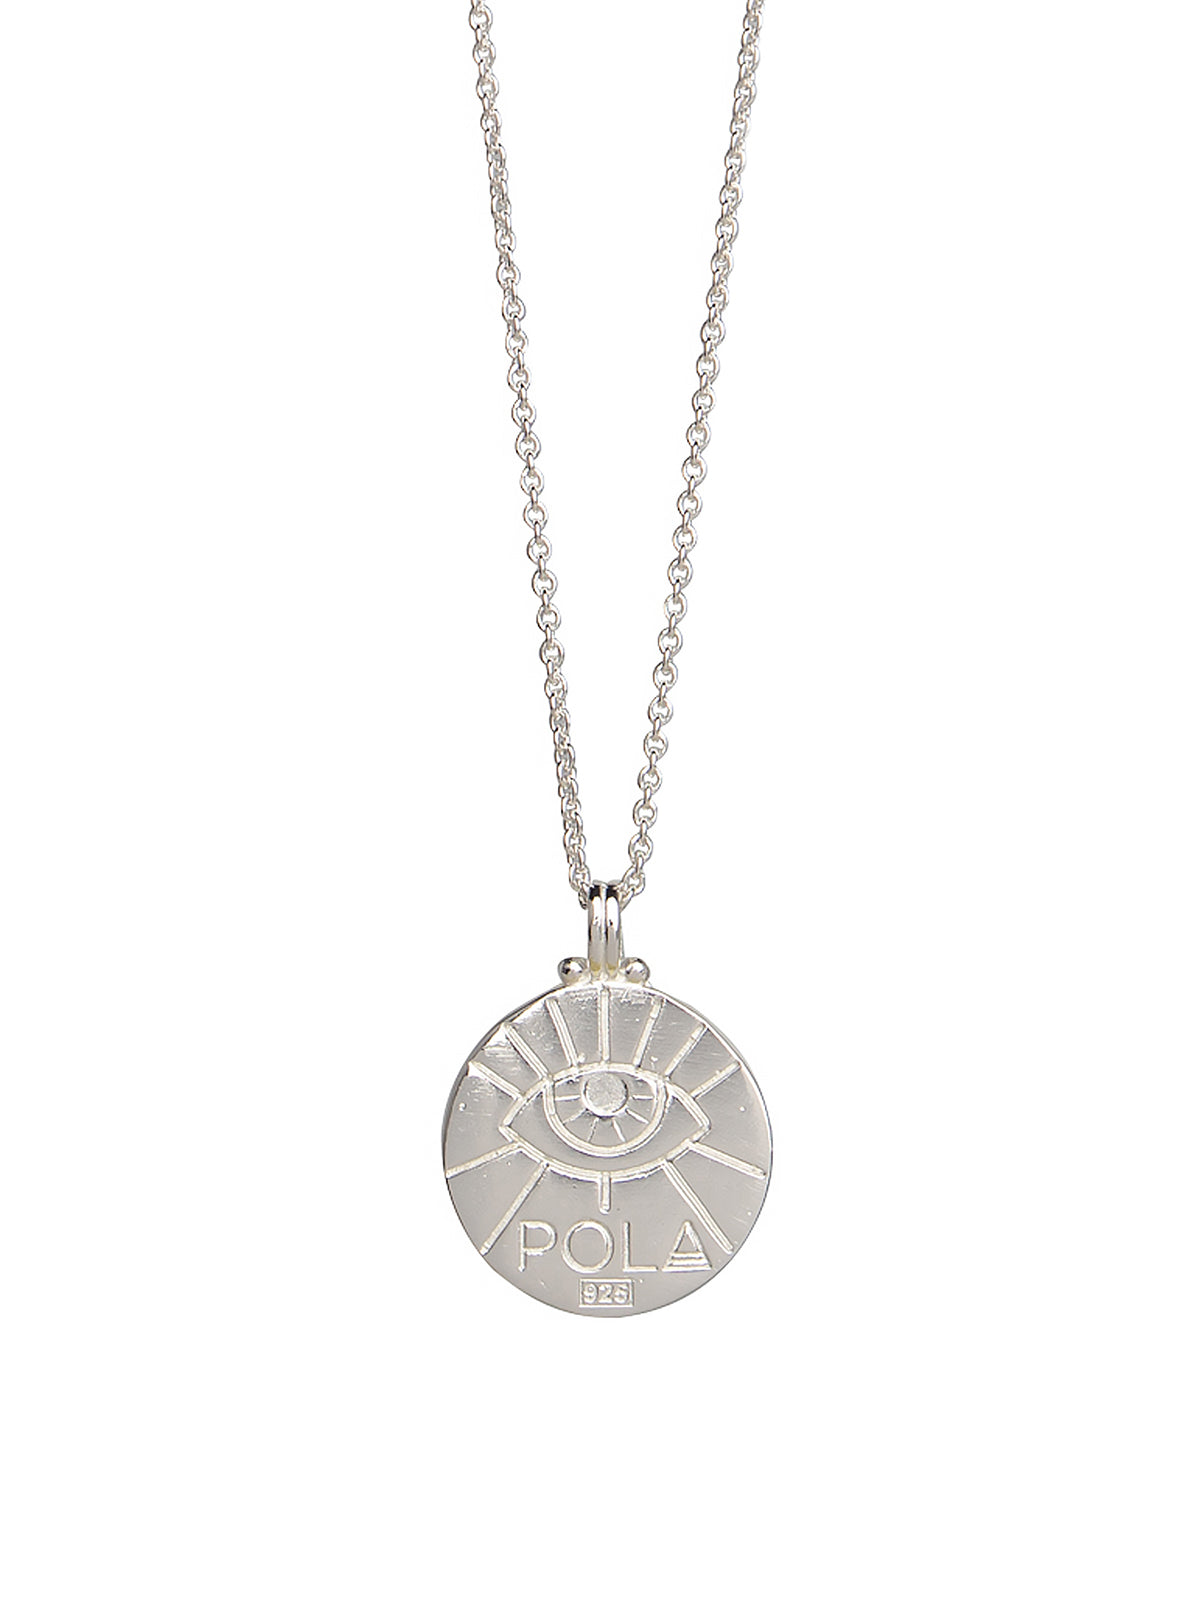 Cancer Zodiac Horoscope Necklace. Gender Neutral. Sterling Silver